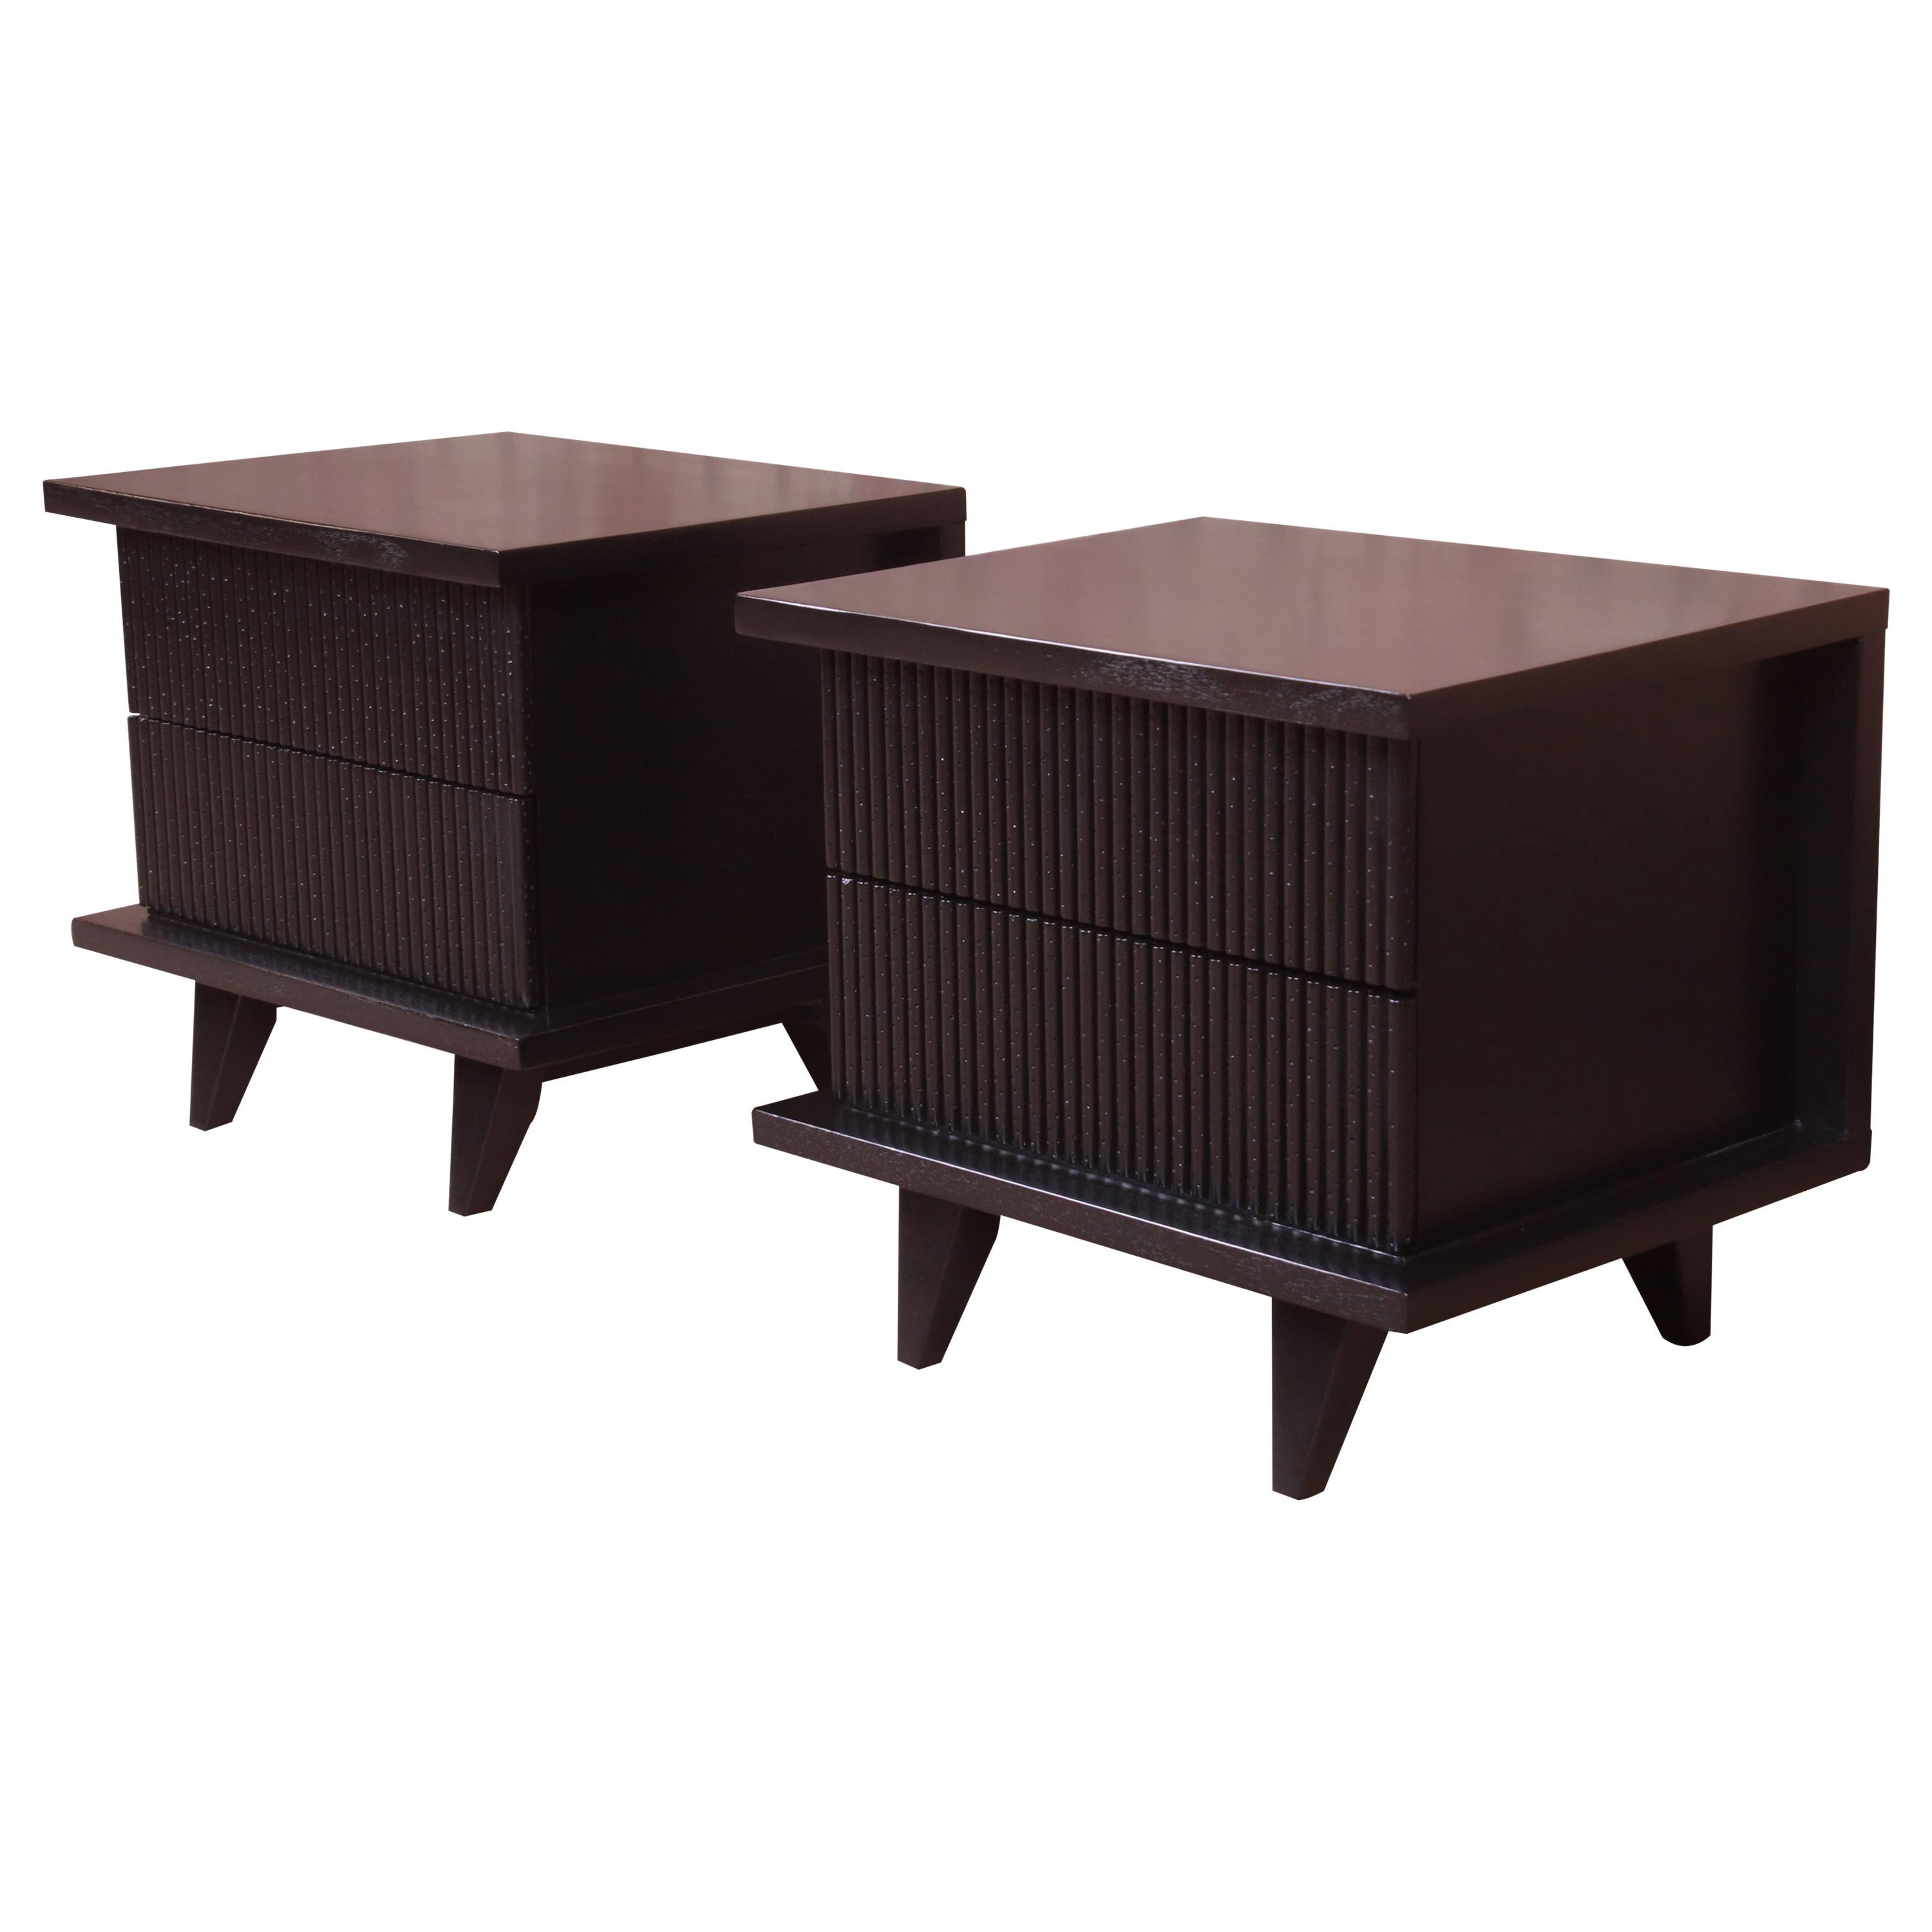 Merton Gershun for American of Martinsville Lacquered Nightstands, Refinished